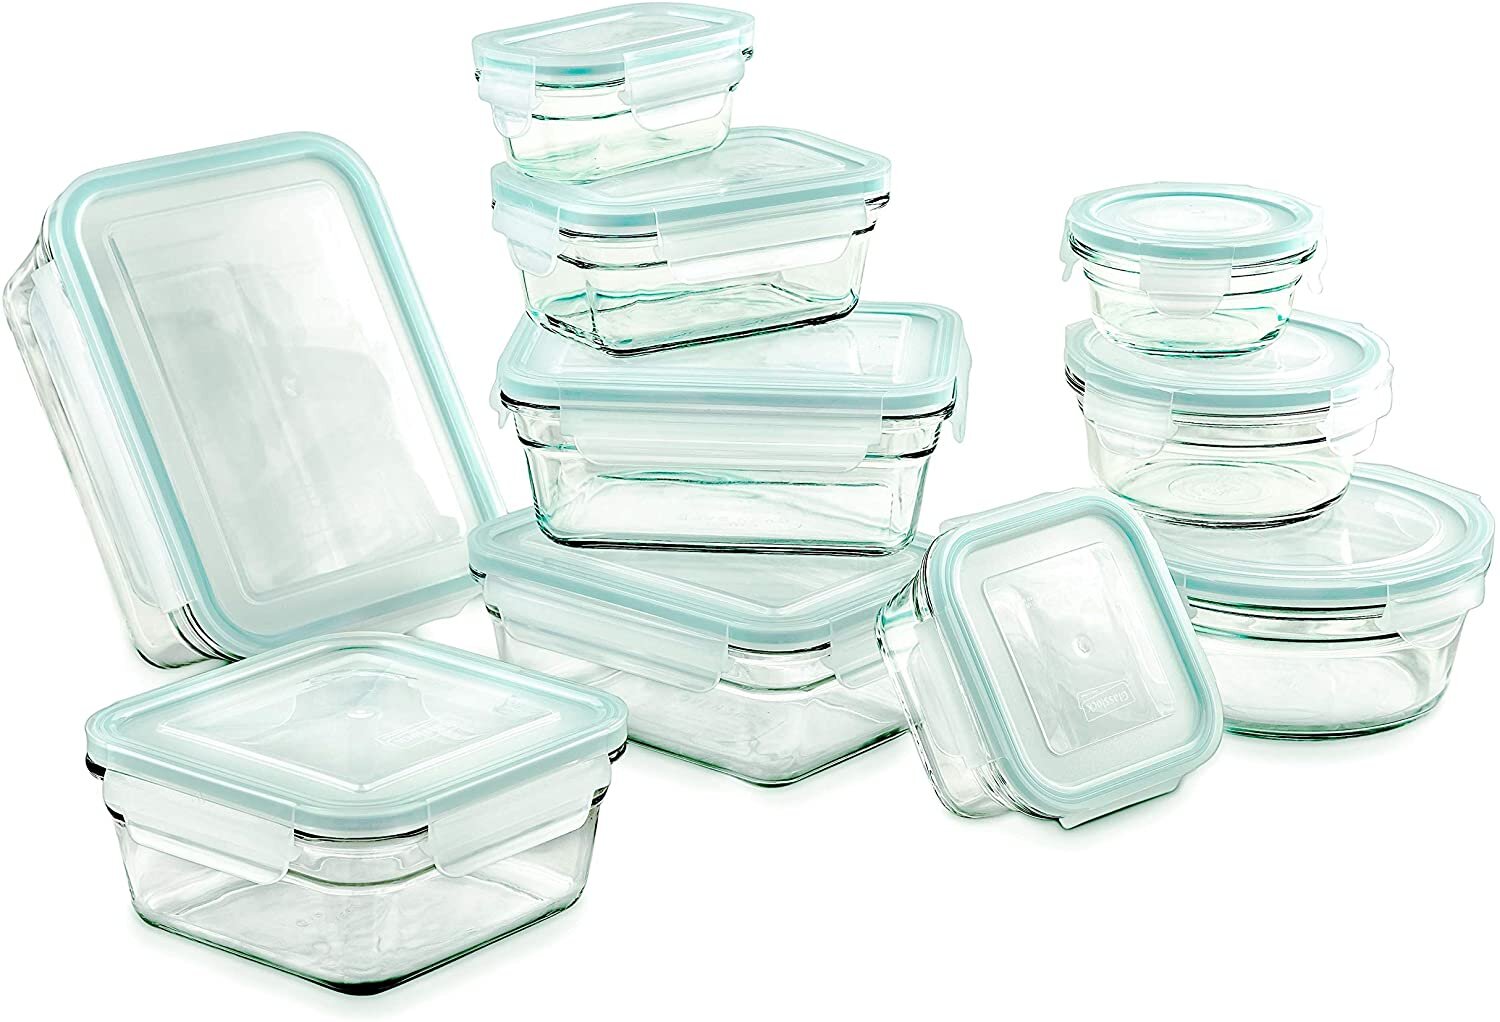 6 pcs ~ NEW Glasslock Tempered Glass Food Storage Containers Microwaveable 